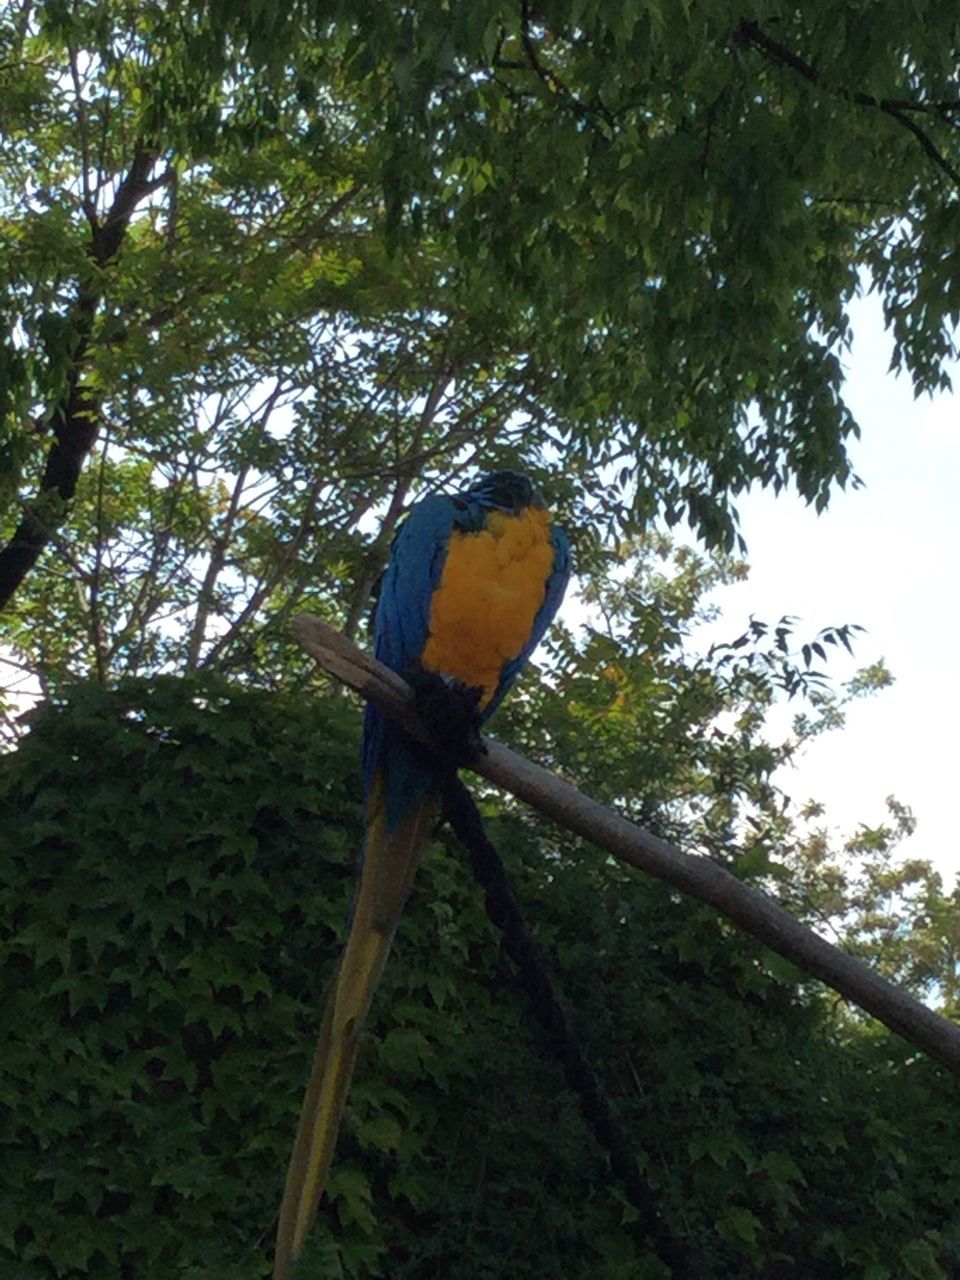 tree, animal themes, one animal, animals in the wild, perching, bird, branch, animal wildlife, low angle view, nature, green color, day, no people, growth, beauty in nature, outdoors, parrot, gold and blue macaw, macaw